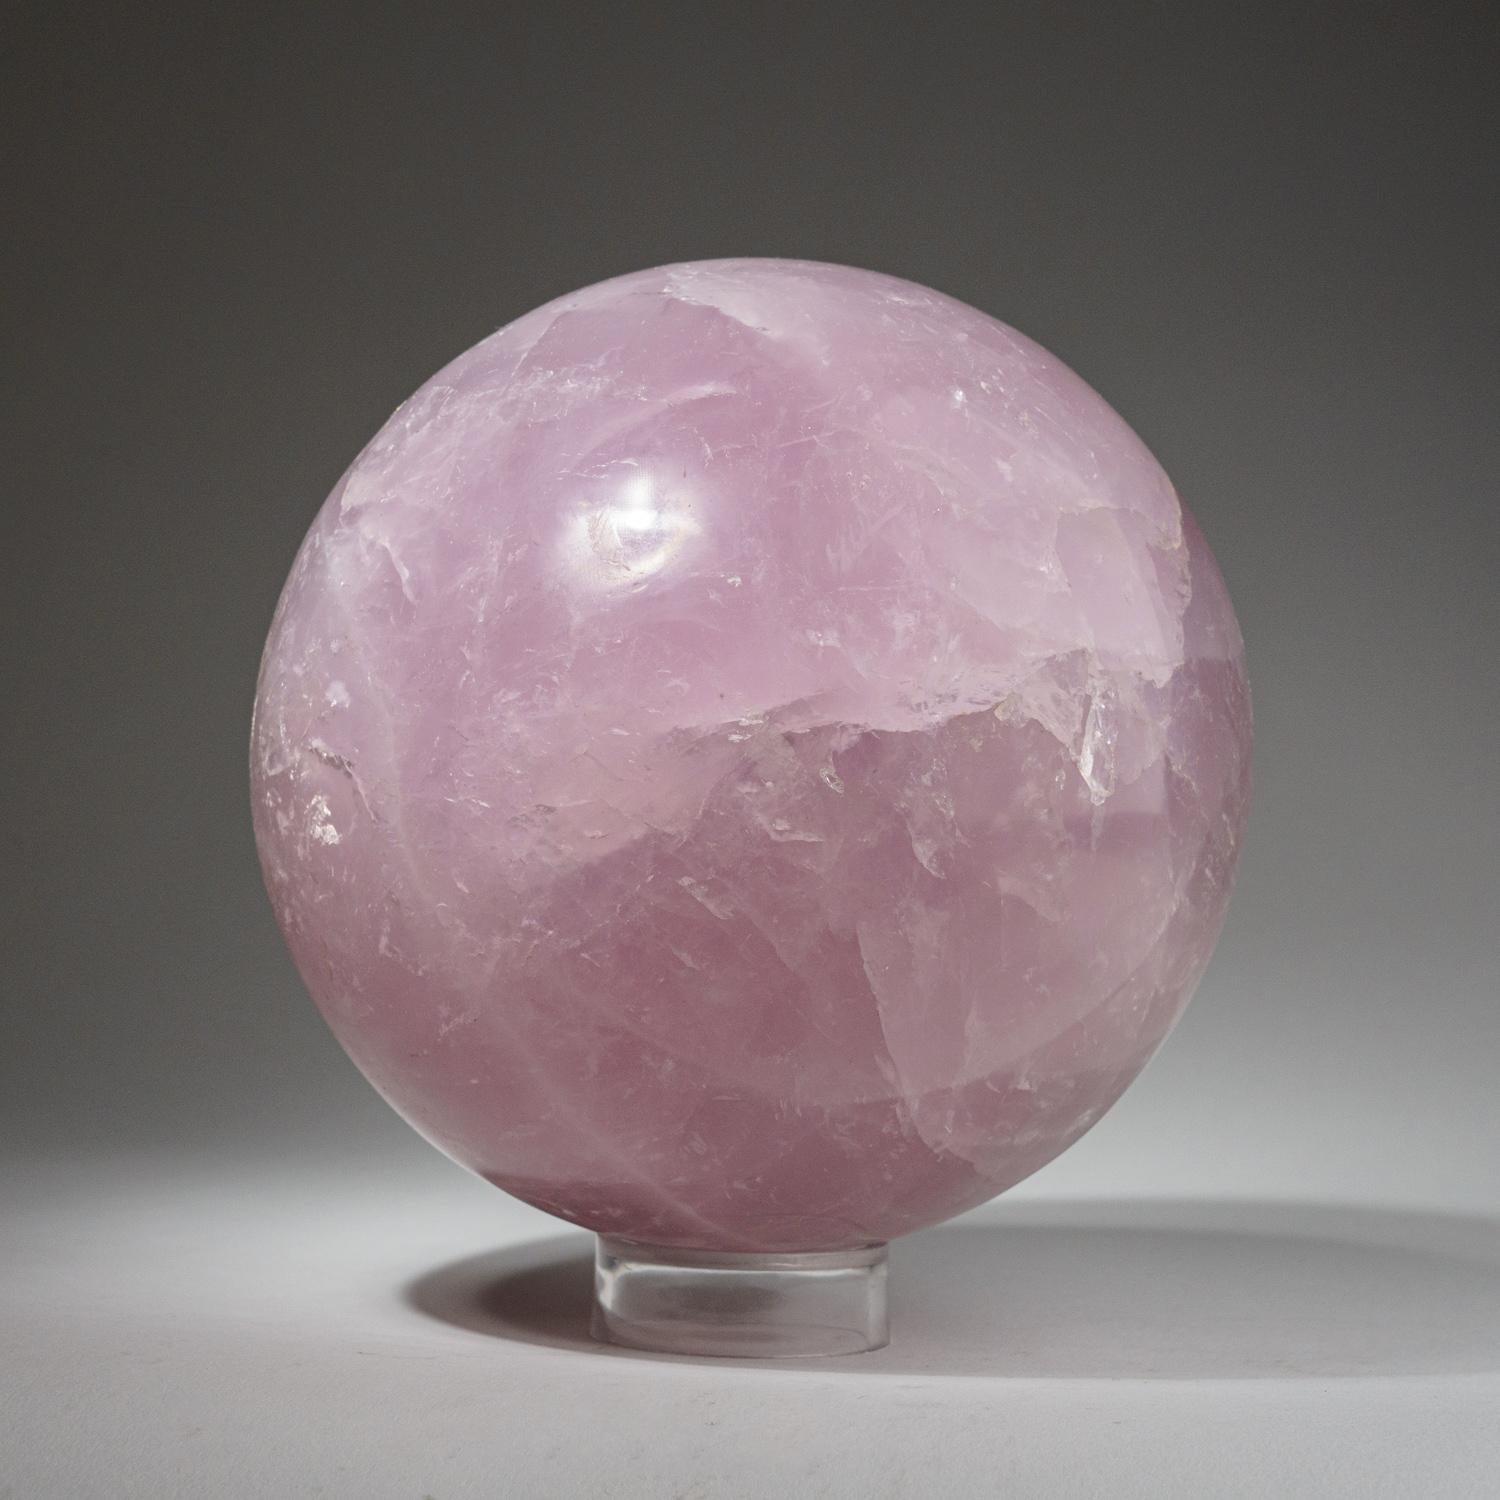 Malagasy Polished Rose Quartz Sphere from Madagascar (10.2 lbs)